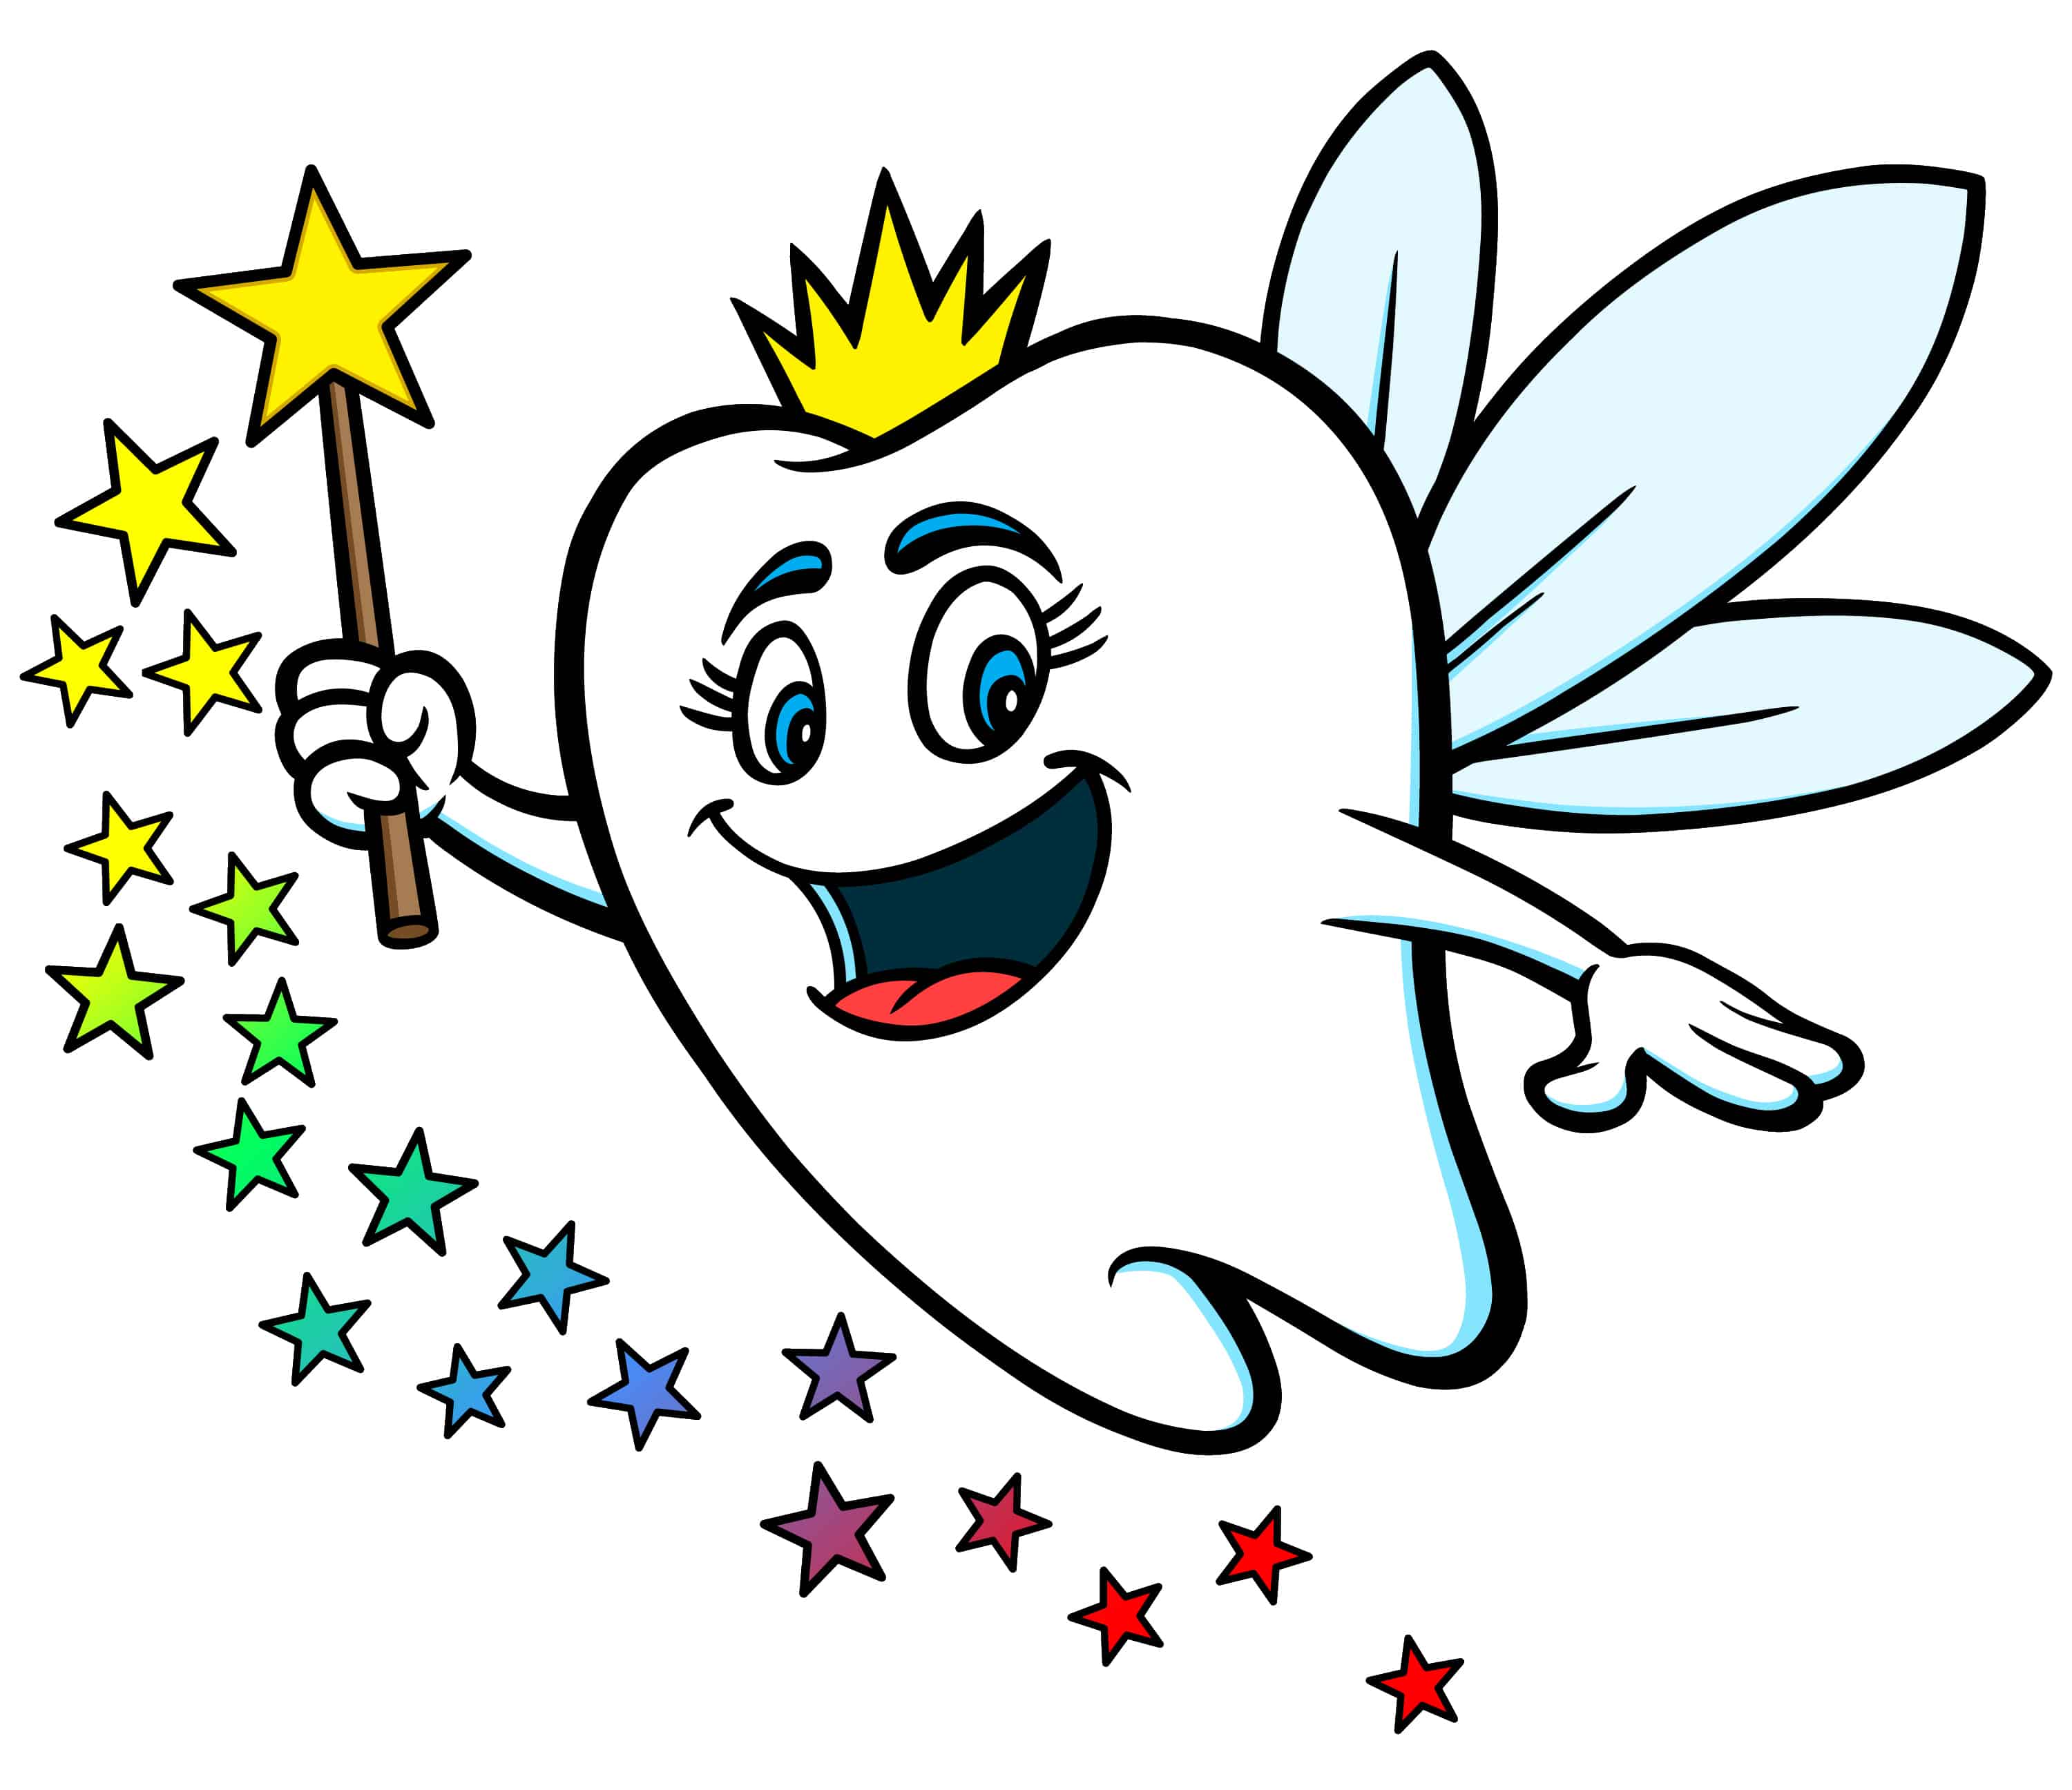 tooth fairy 2 online free